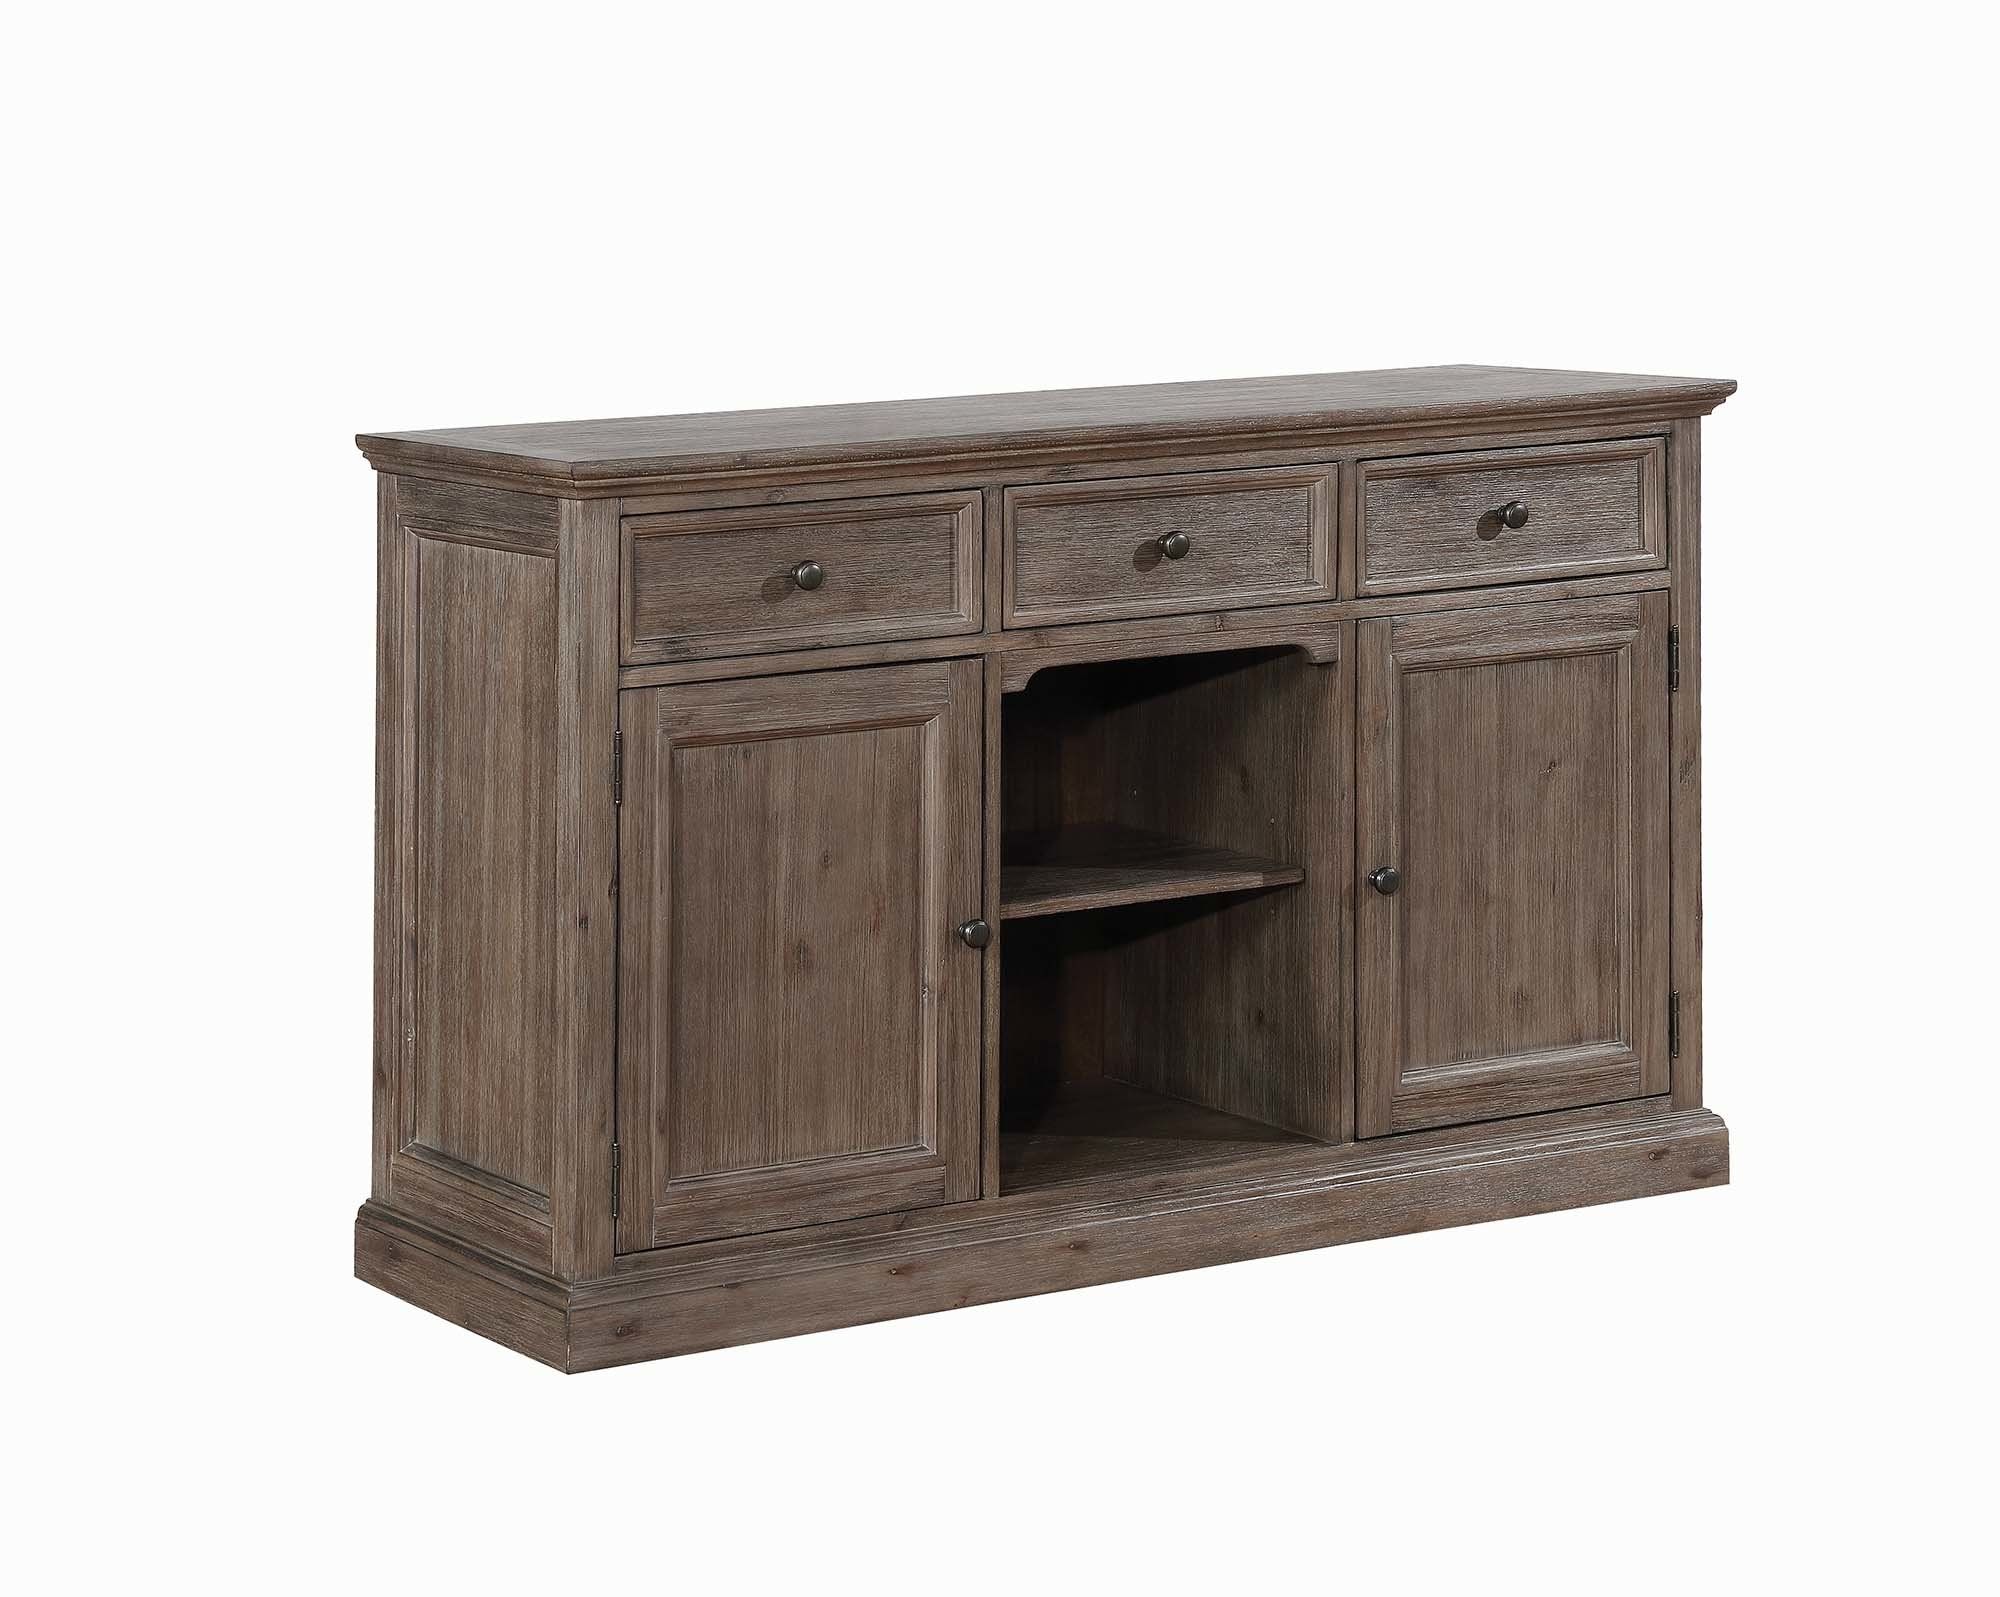 Roeder Sideboard Within 2018 Stennis Sideboards (View 8 of 20)